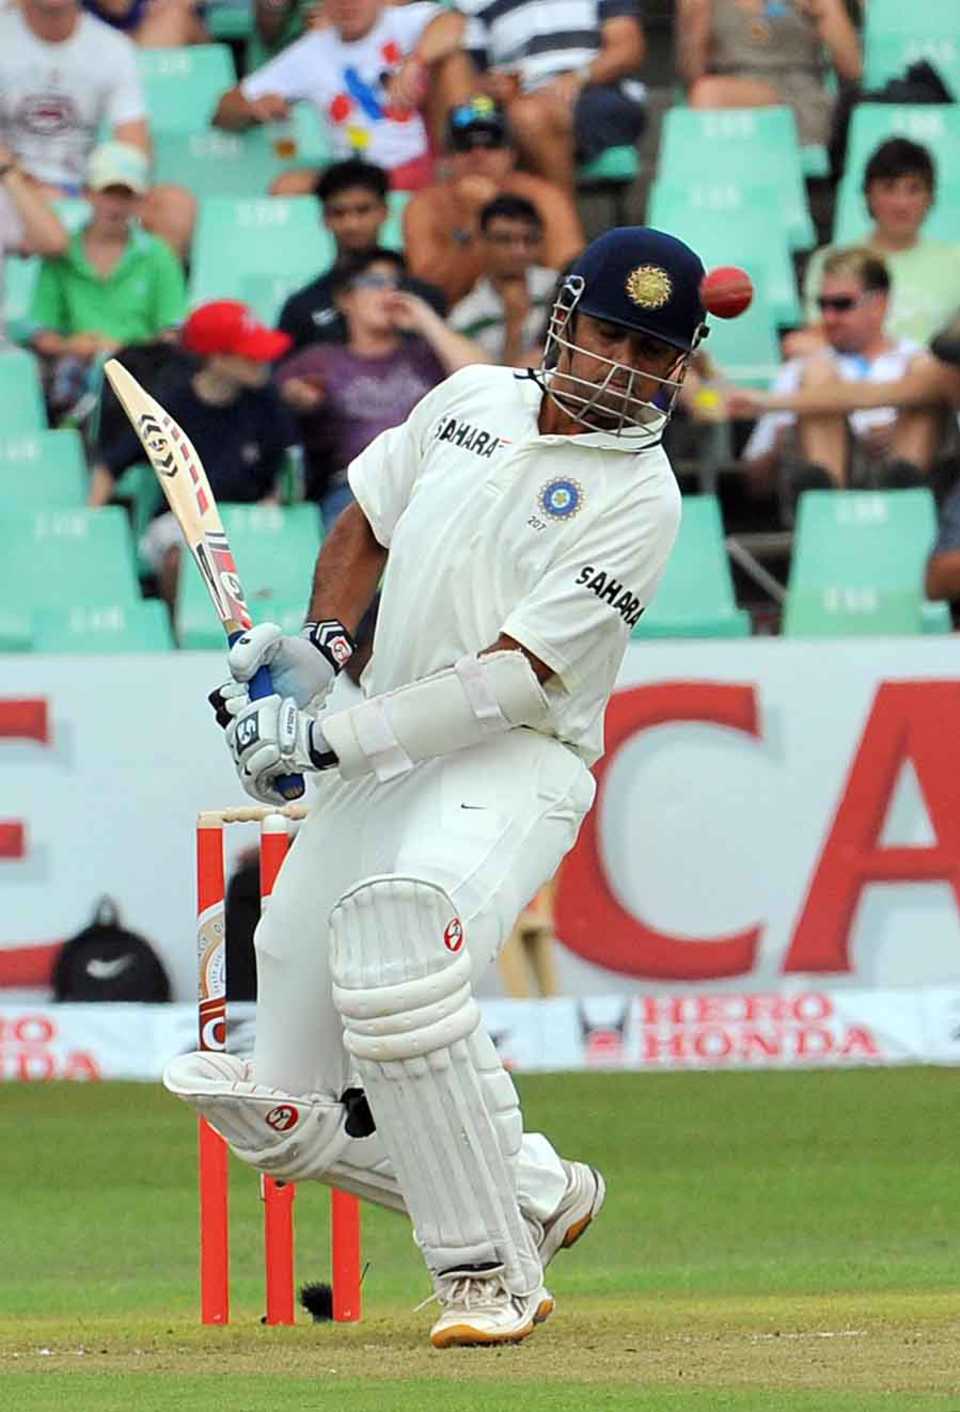 Rahul Dravid sways away from a bouncer